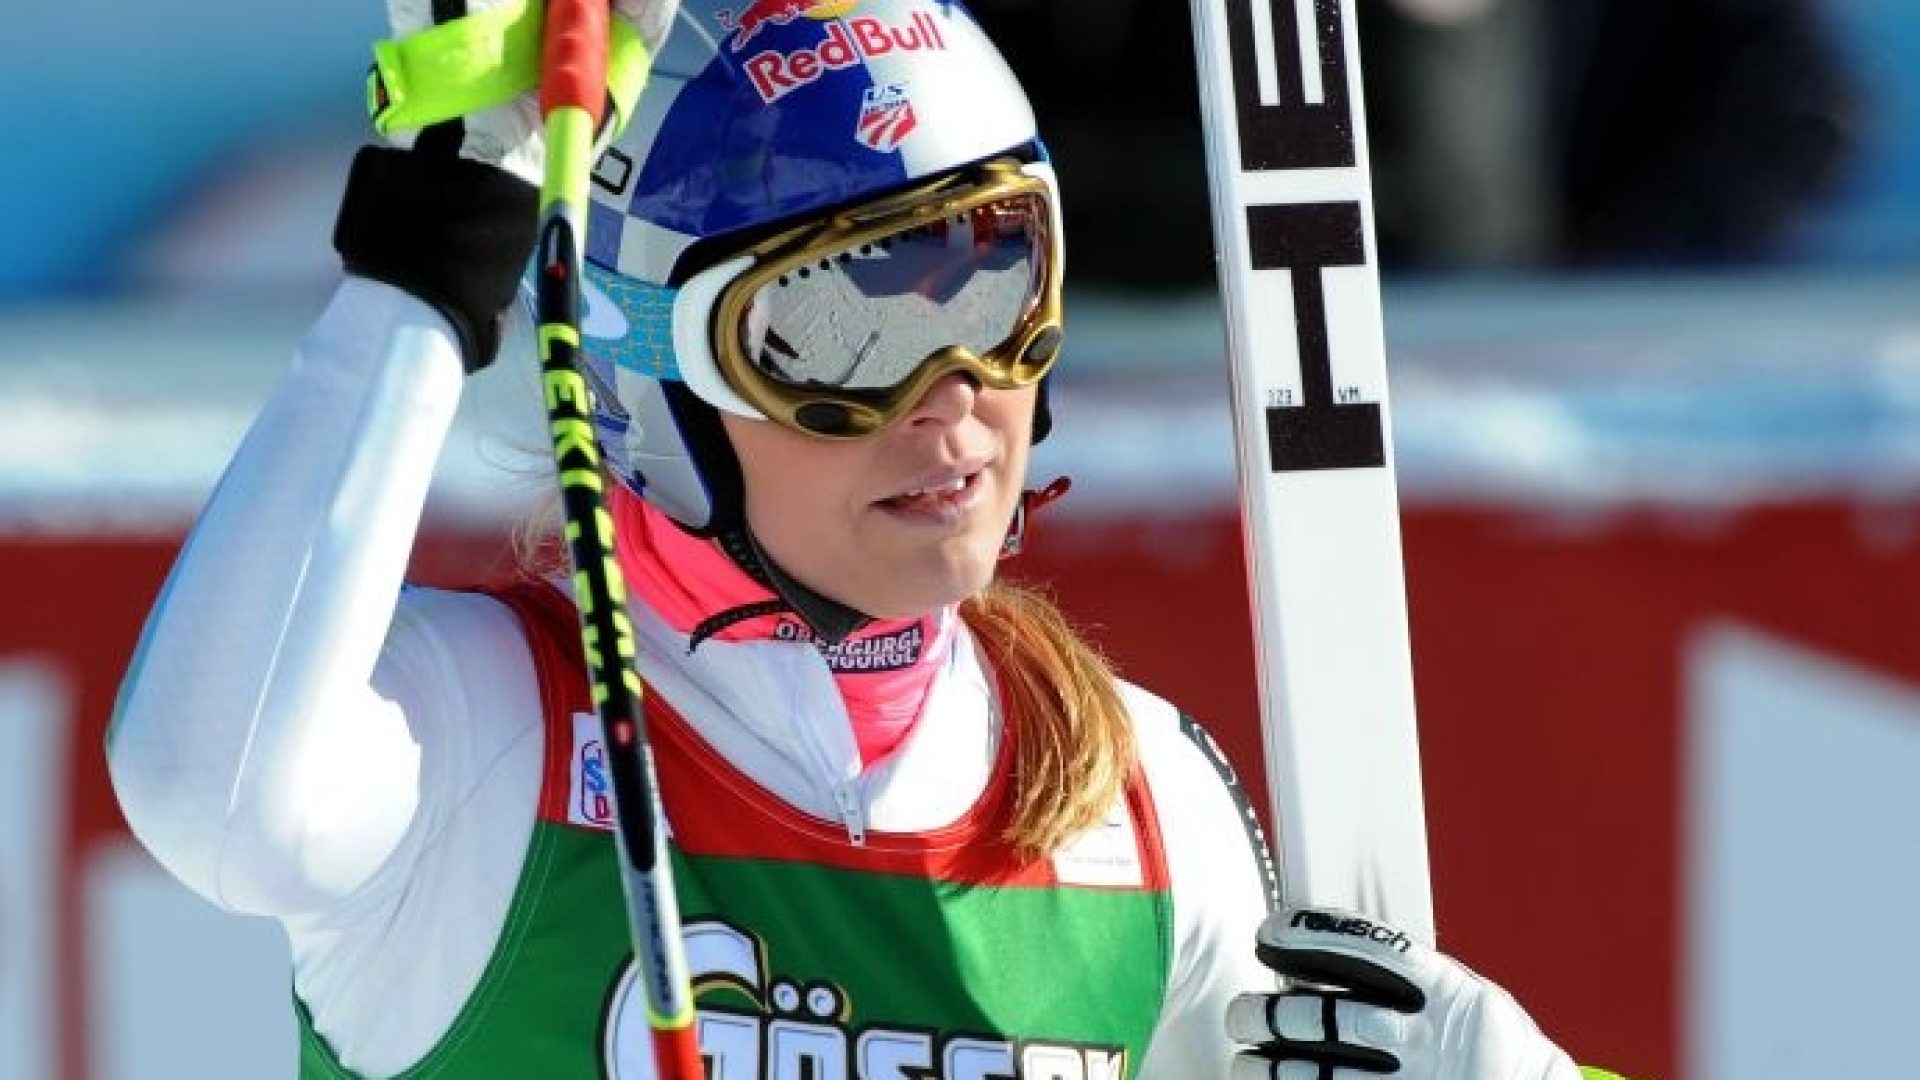 lindsey-vonn-at-the-wc-downhill-in-st-anton